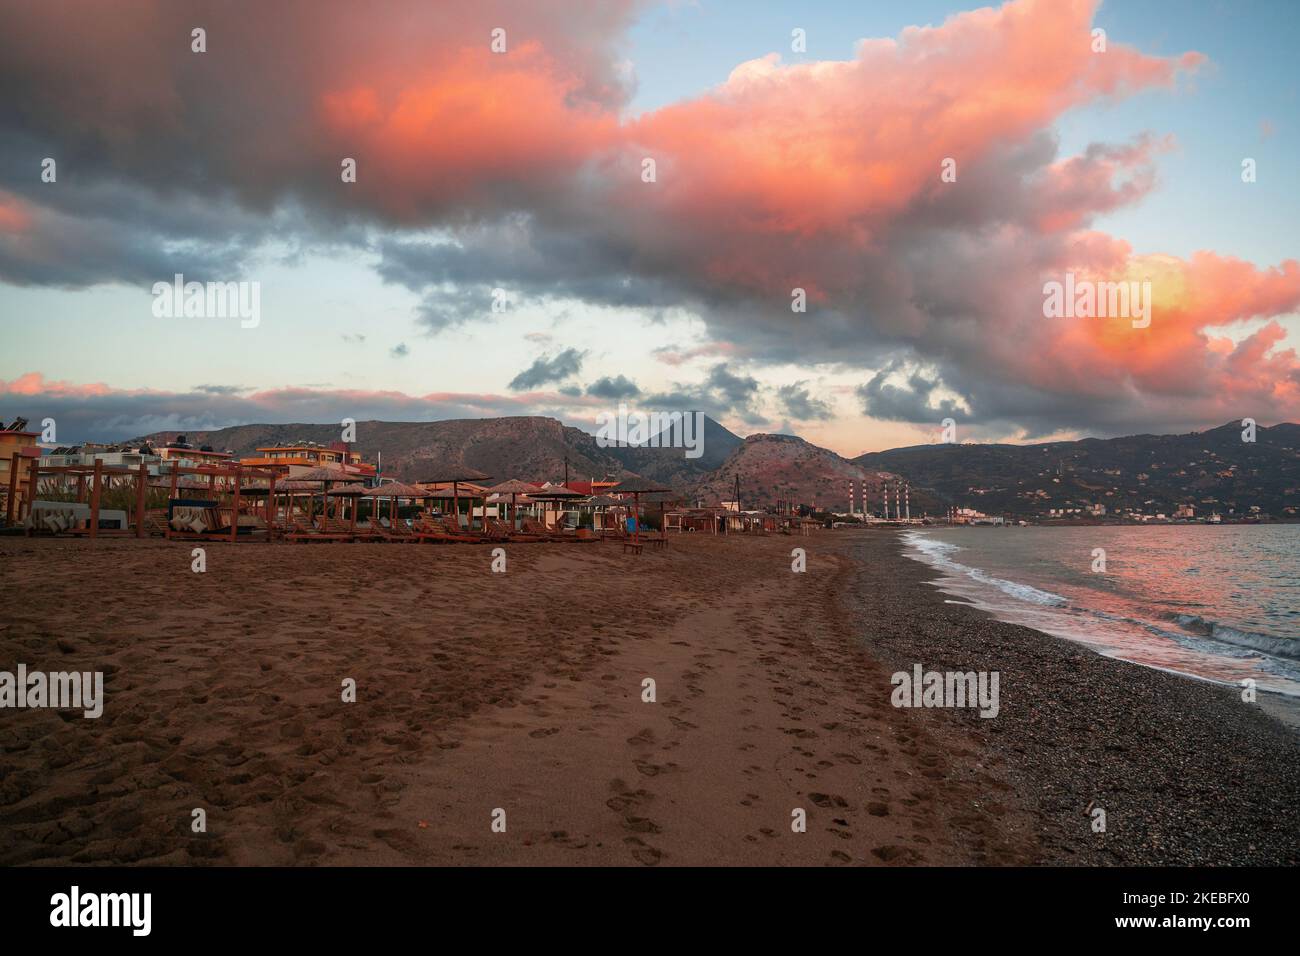 Beach in Amoudara, Crete, in morning sunrise with red cloud and calm sea. Stock Photo